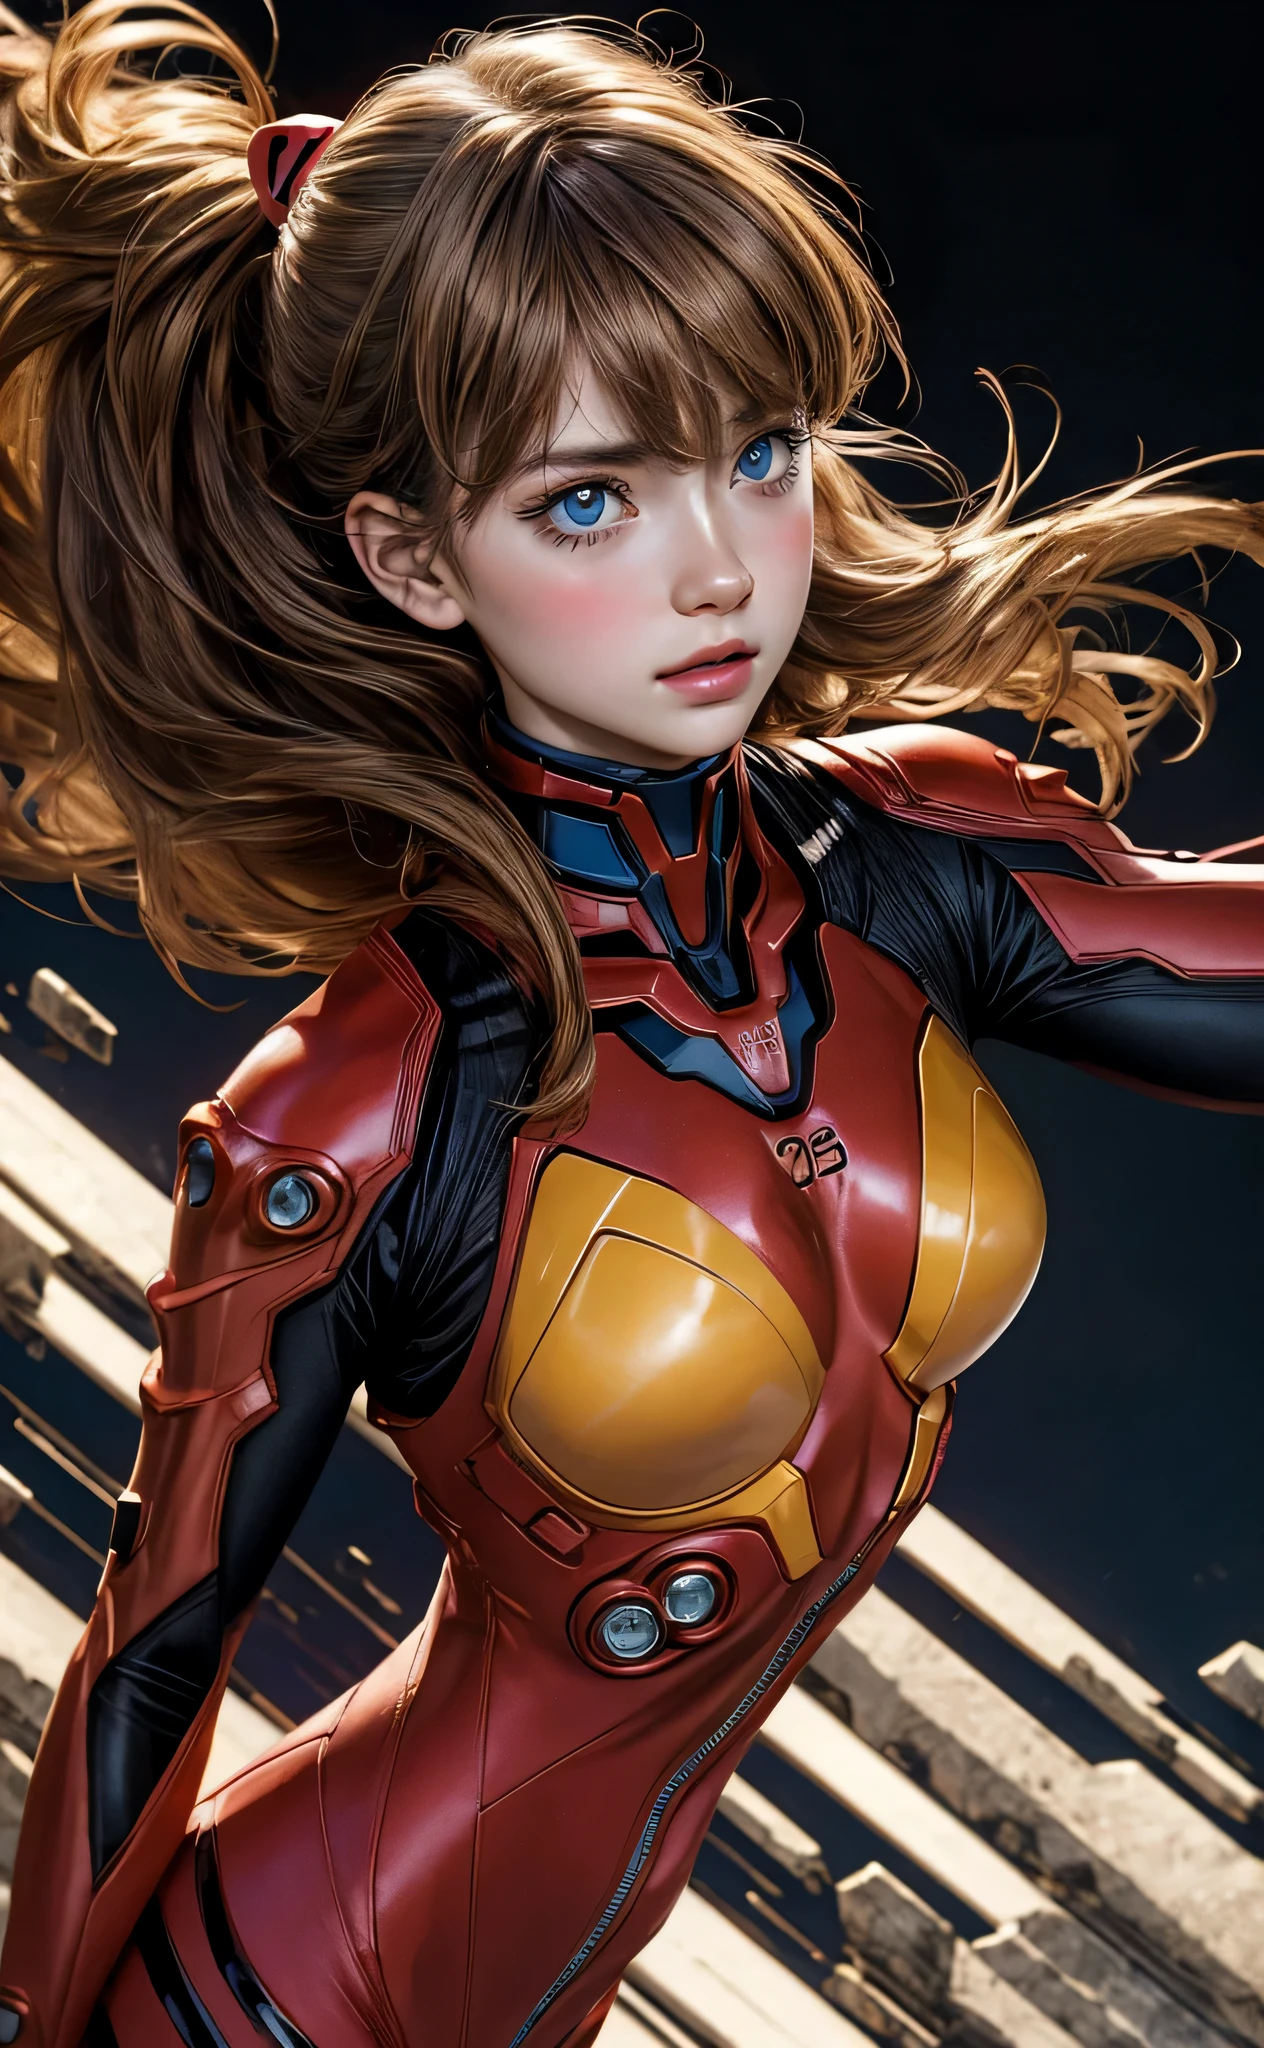 (masutepiece: 1.4, Best Quality), (intricate detailes), Unity 8k Wallpaper, super detailed, Beautiful and mysterious, Detailed background, Real, 独奏, Perfectly detailed face, Detailed blue eyes, Very detailed, blush, hair ornament , Chignon mahogany hair, (a blond), Plug Suit 02, Shikinami Asuka Langley, evangelion, slender 15 year old girl, full body suits, Black background, Above the waist, Dynamic pose with large movements, Dynamic Angle,